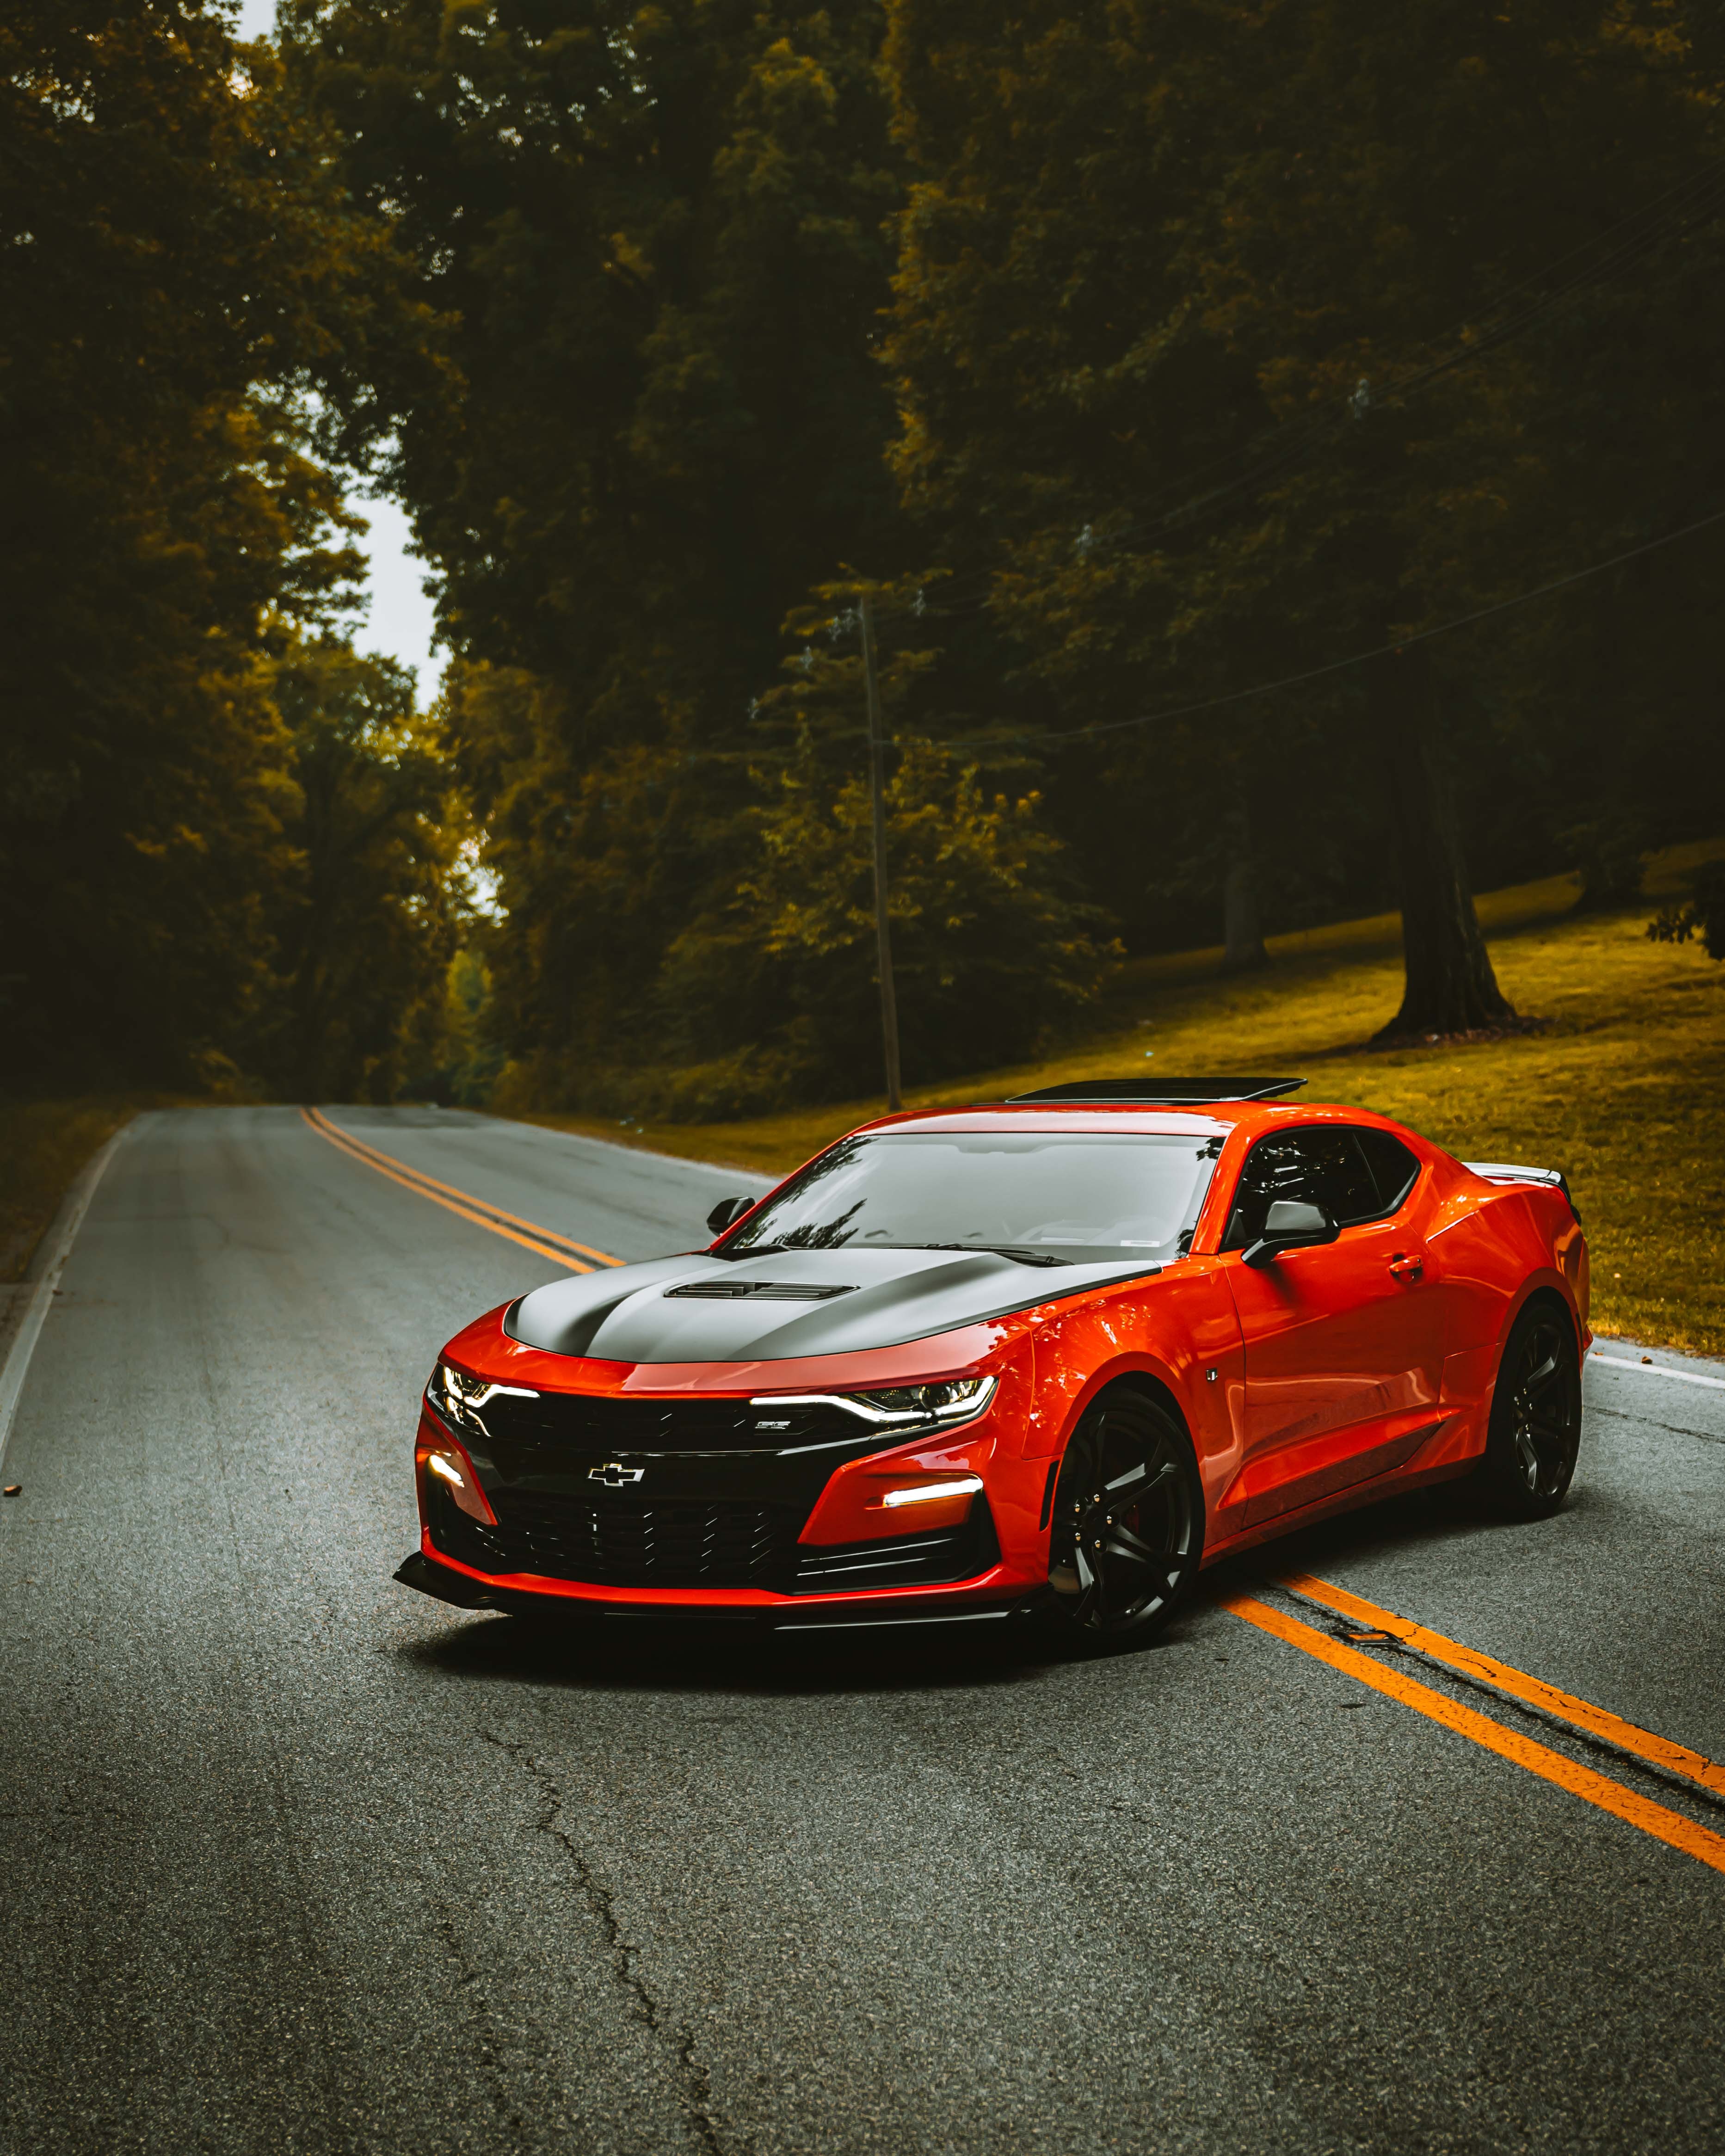 133431 download wallpaper sports, chevrolet, cars, red, road, car, machine, sports car, chevrolet camaro screensavers and pictures for free